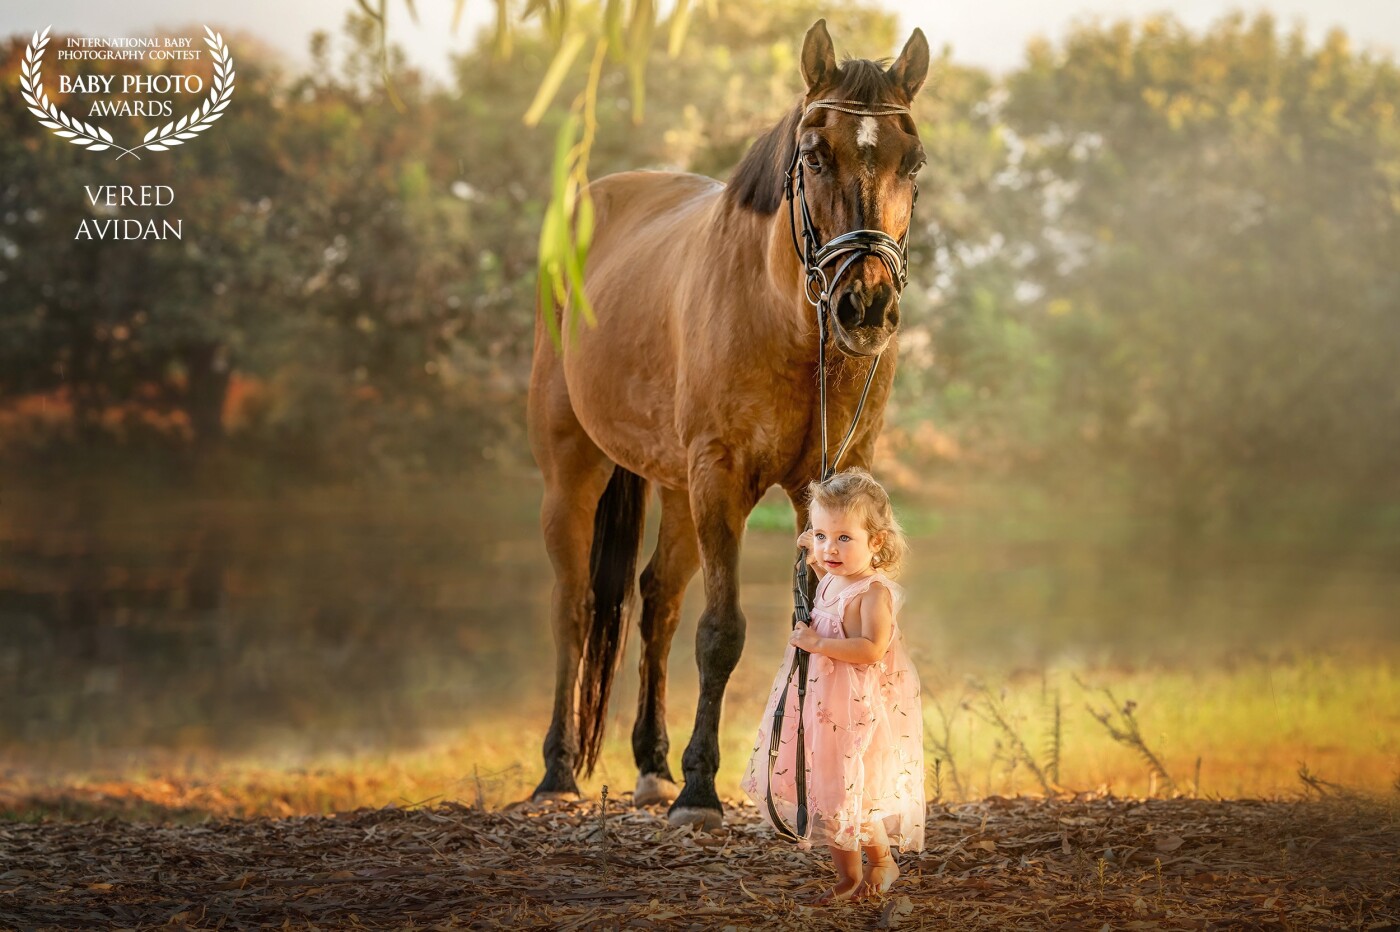 The little girl is Yaara. She is 1.7 years old. She is very young,  but feels totally comfortable with horses... she is so sweet and funny, and it was a joy to photograph her.